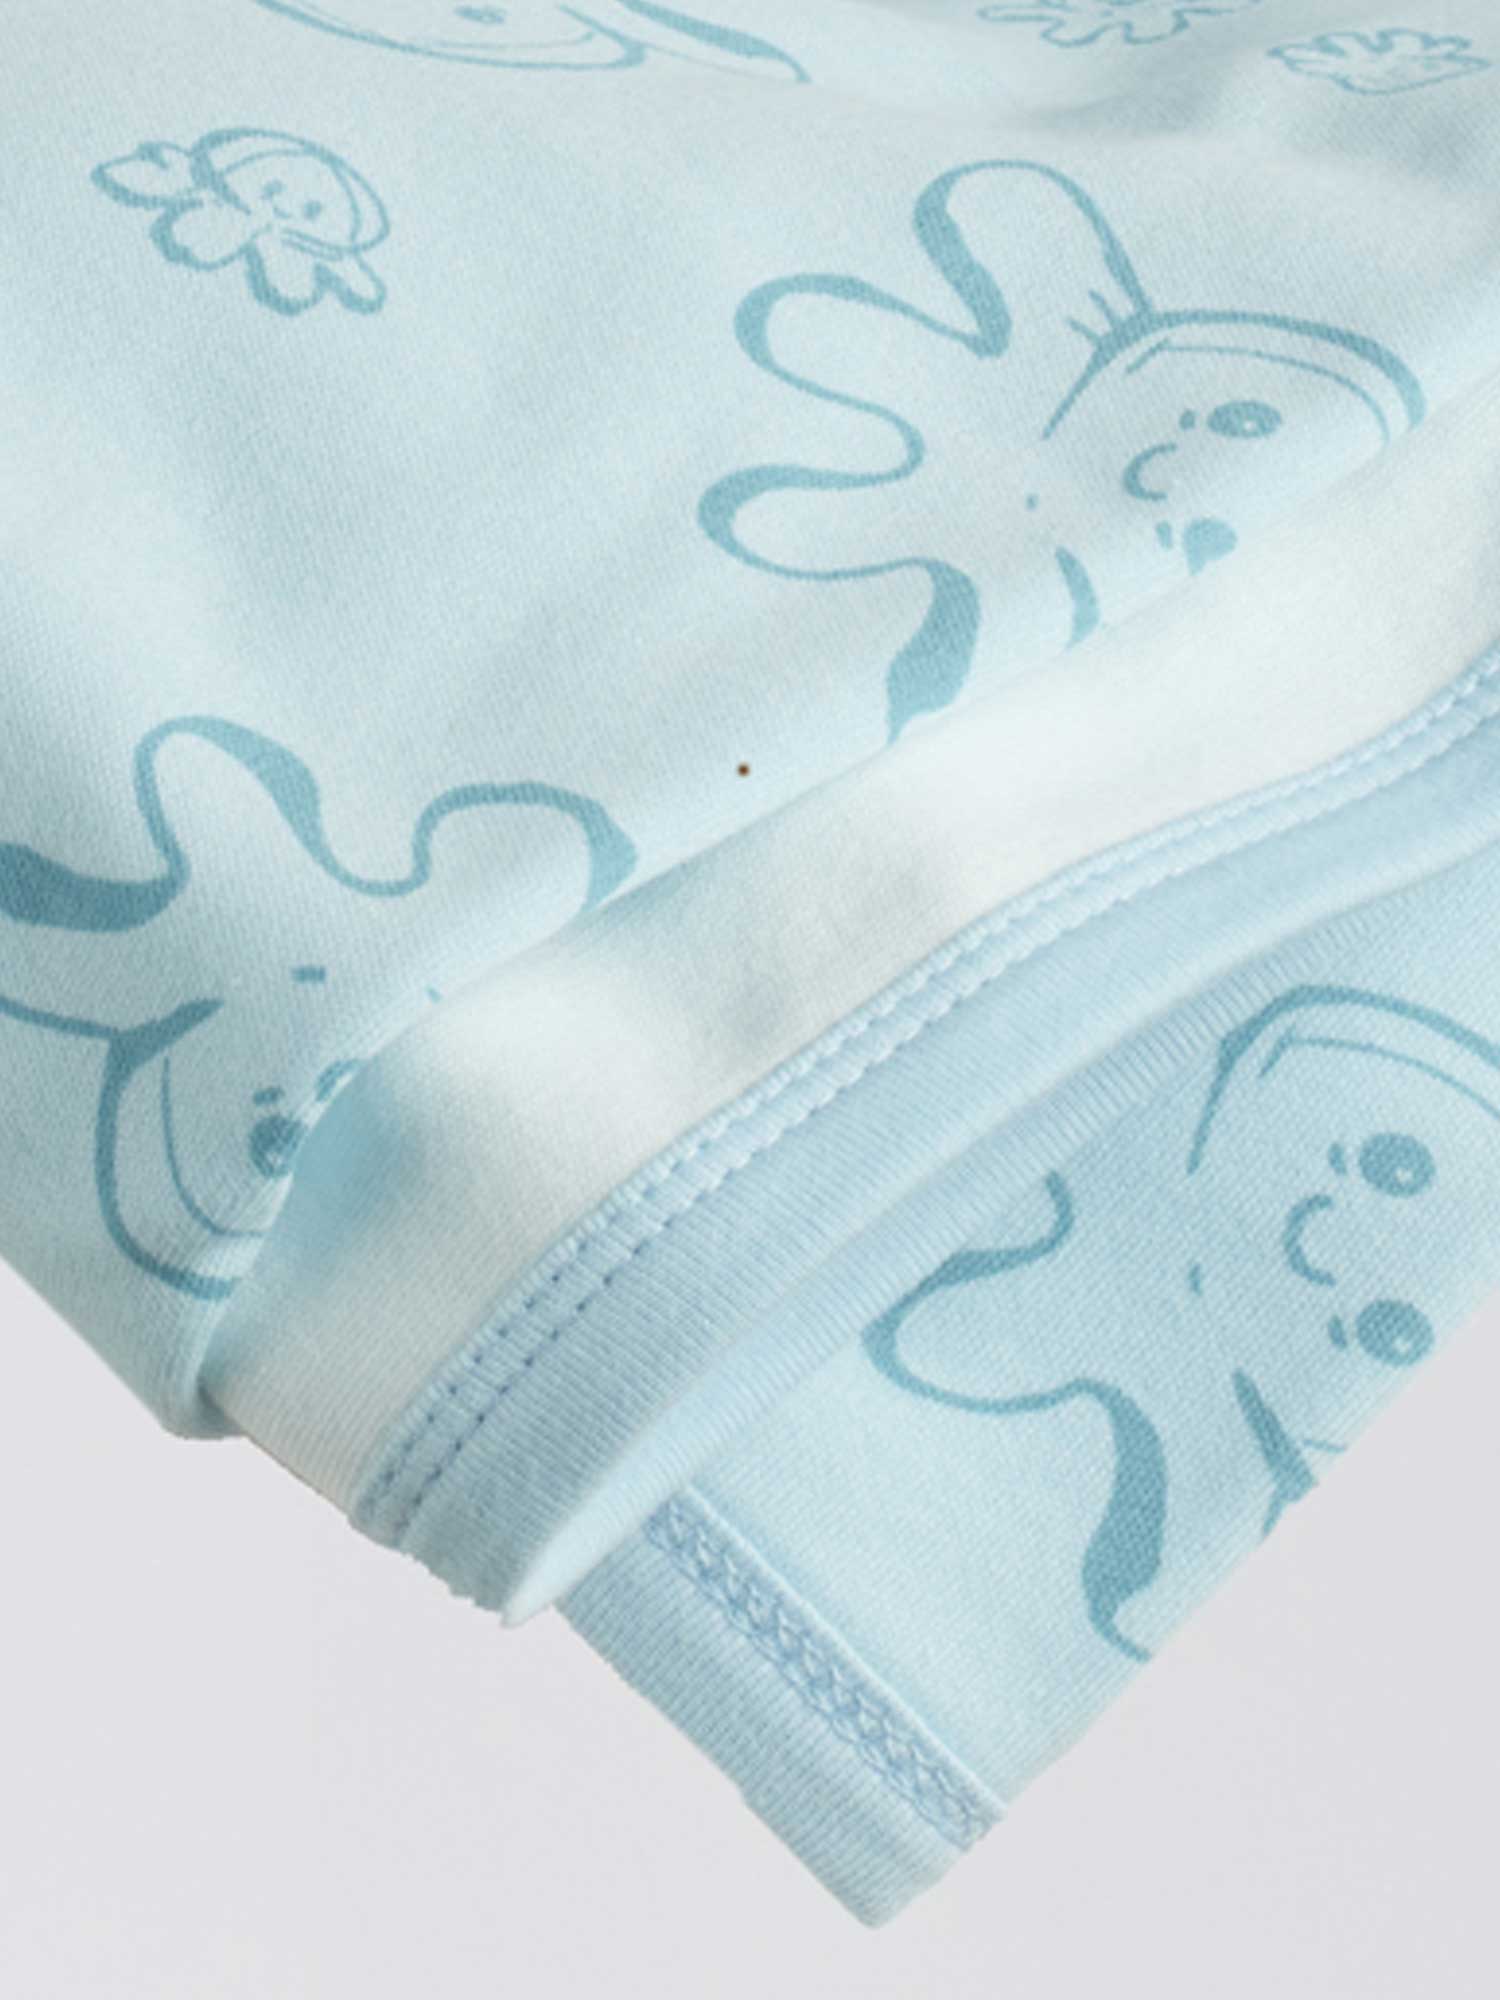 Baby Blanket Sea Friends 339 is made from 100% cotton certified with Oeko-Tex Standard 100 that ensures no harmful substances were used in its manufacture, so you can trust that your little one is wrapped up in comforting, safe material.